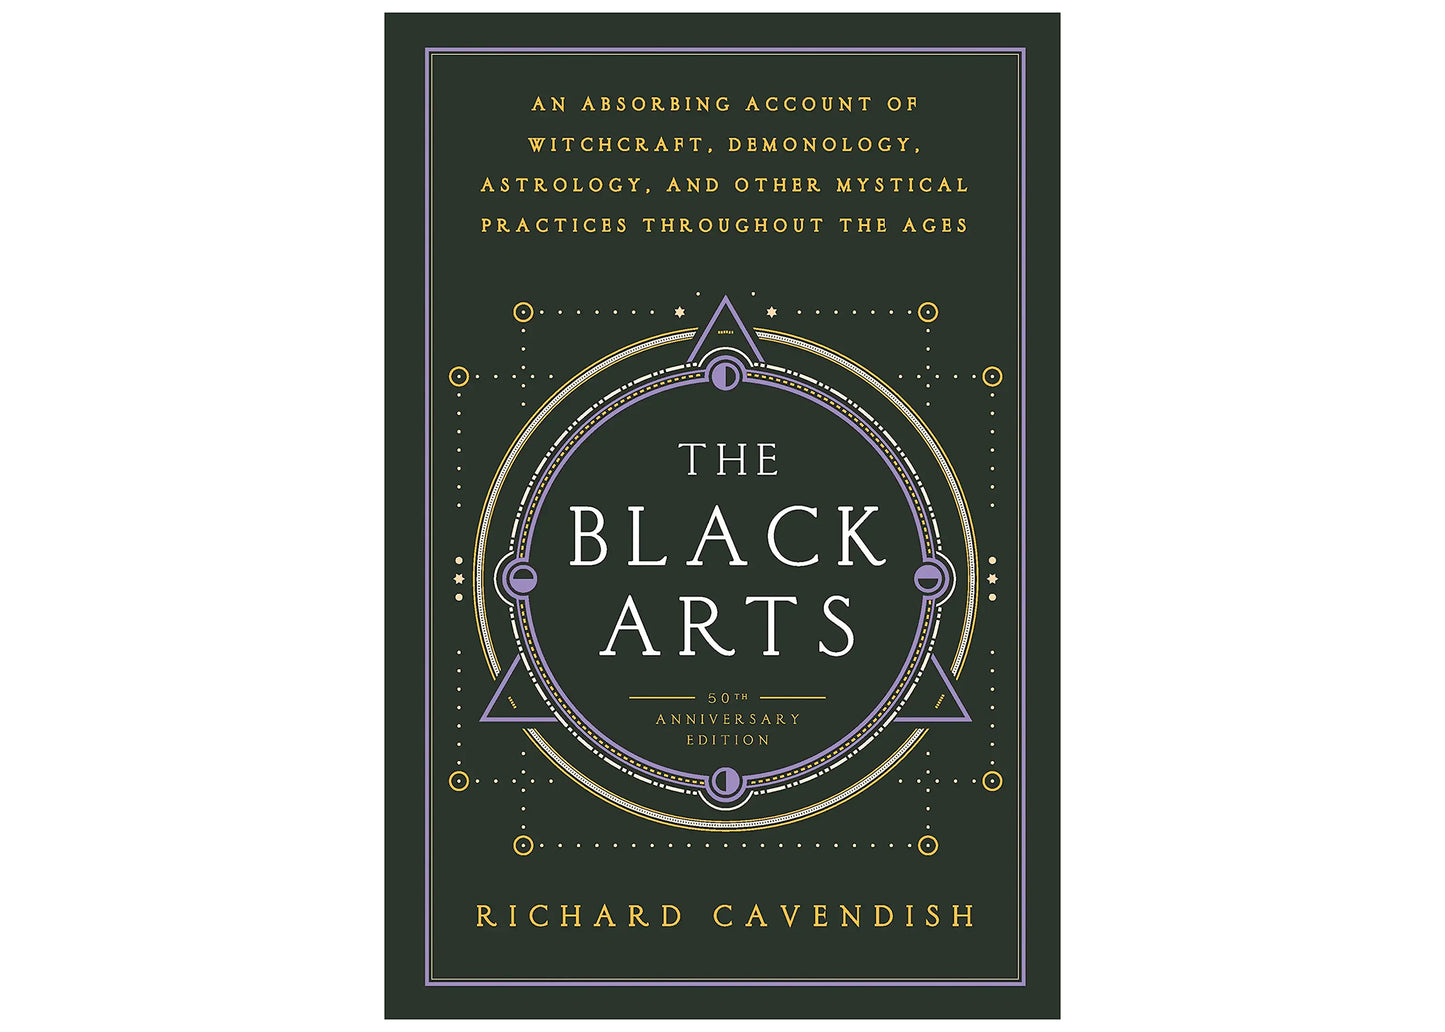 The Black Arts: An Absorbing Account of Witchcraft, Demonology, Astrology, Alchemy, and Other Mystical Practices Throughout the Ages Book